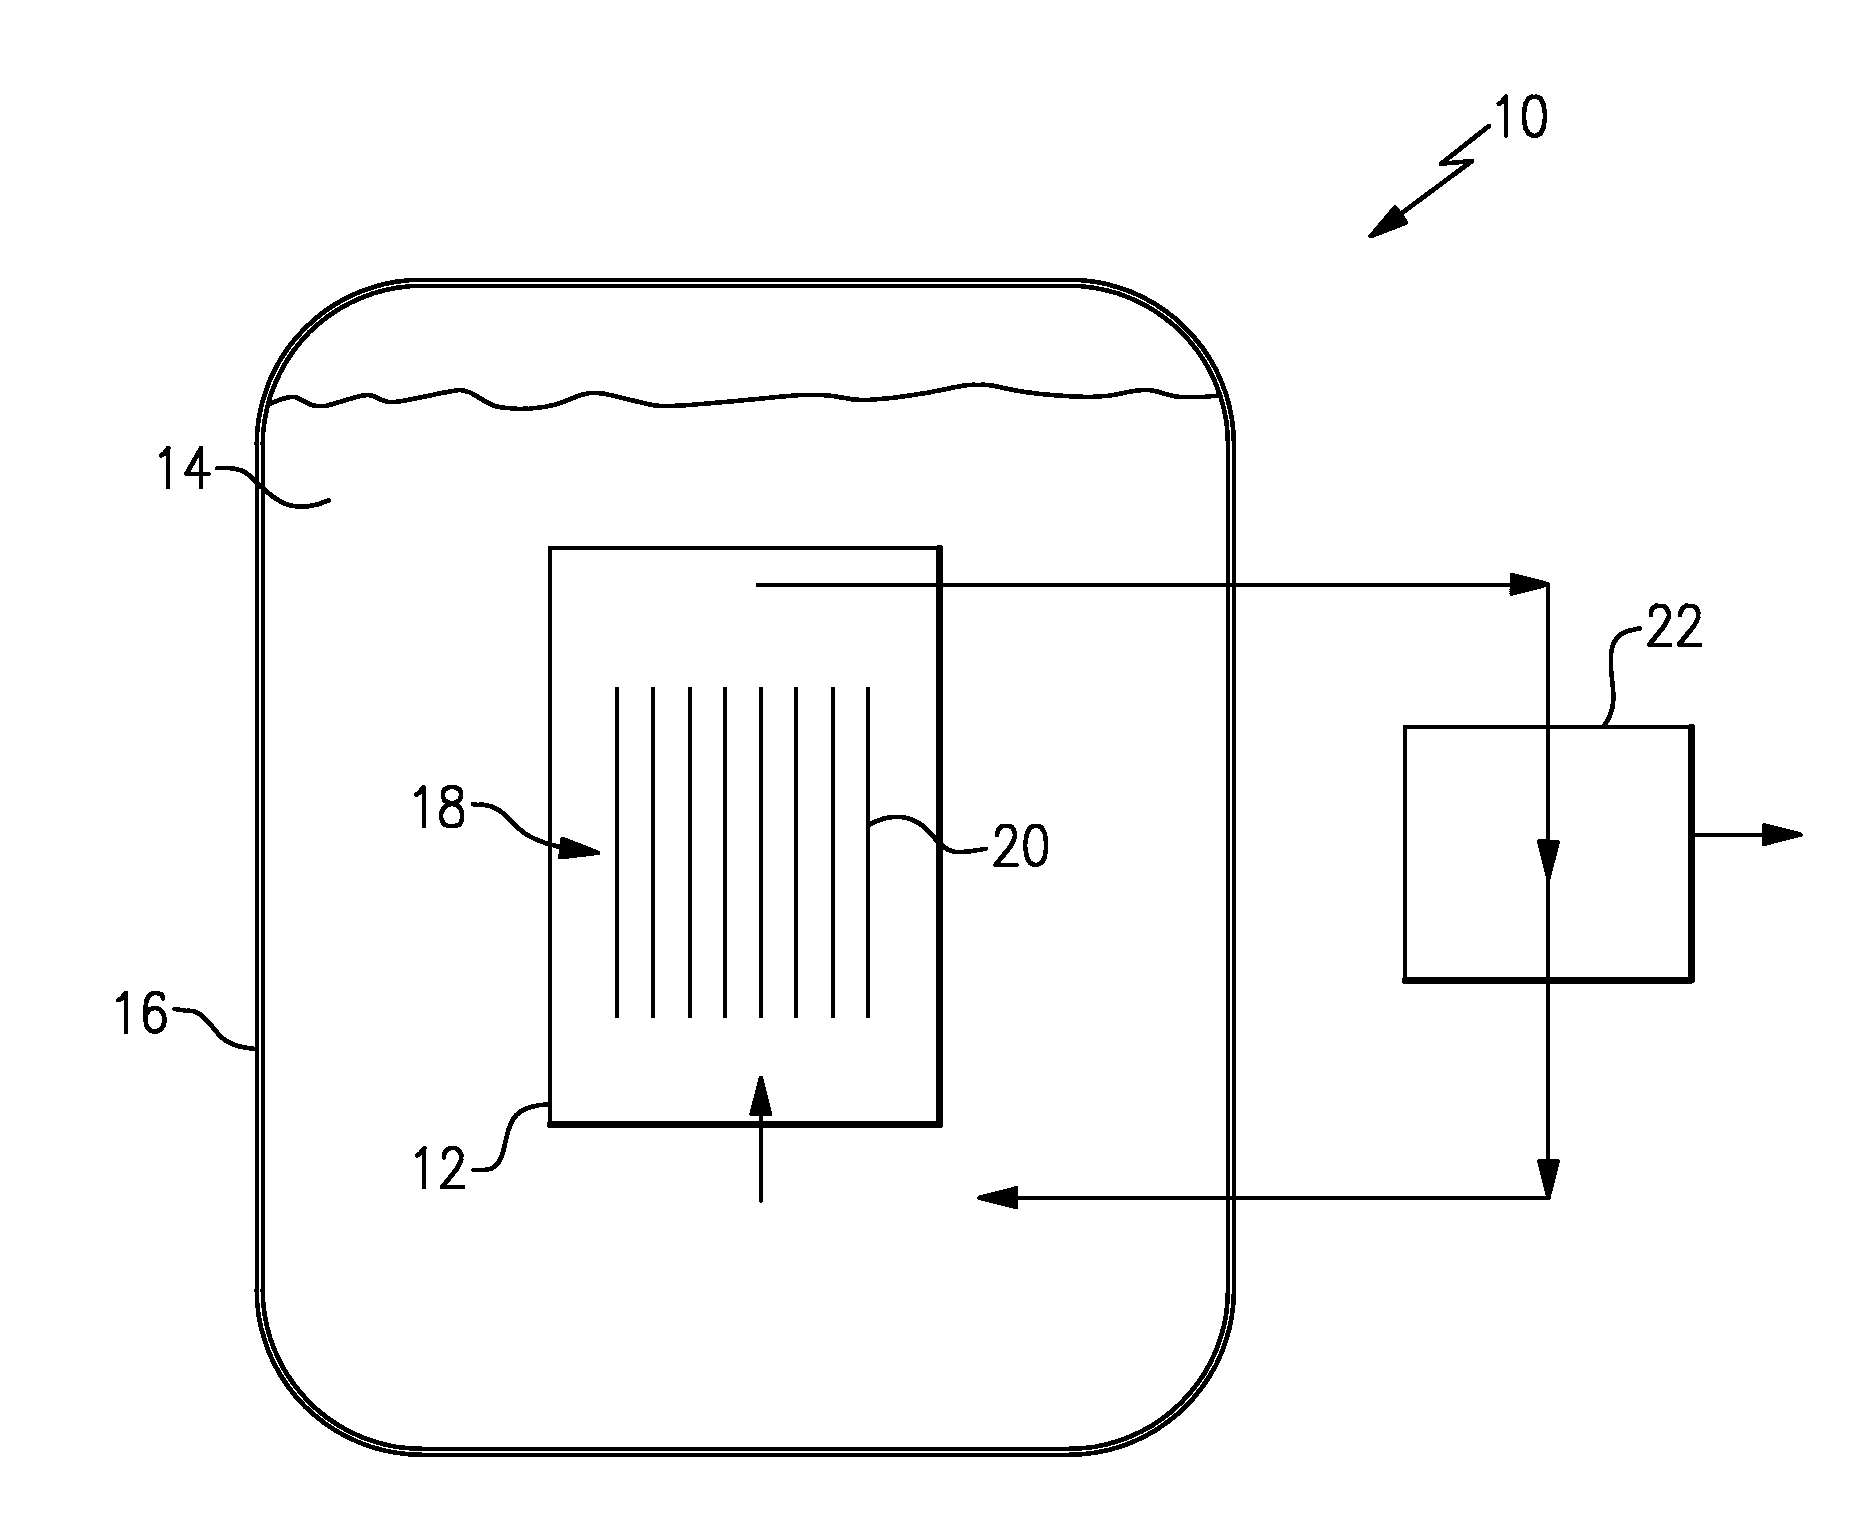 Method and composition for moderated nuclear fuel